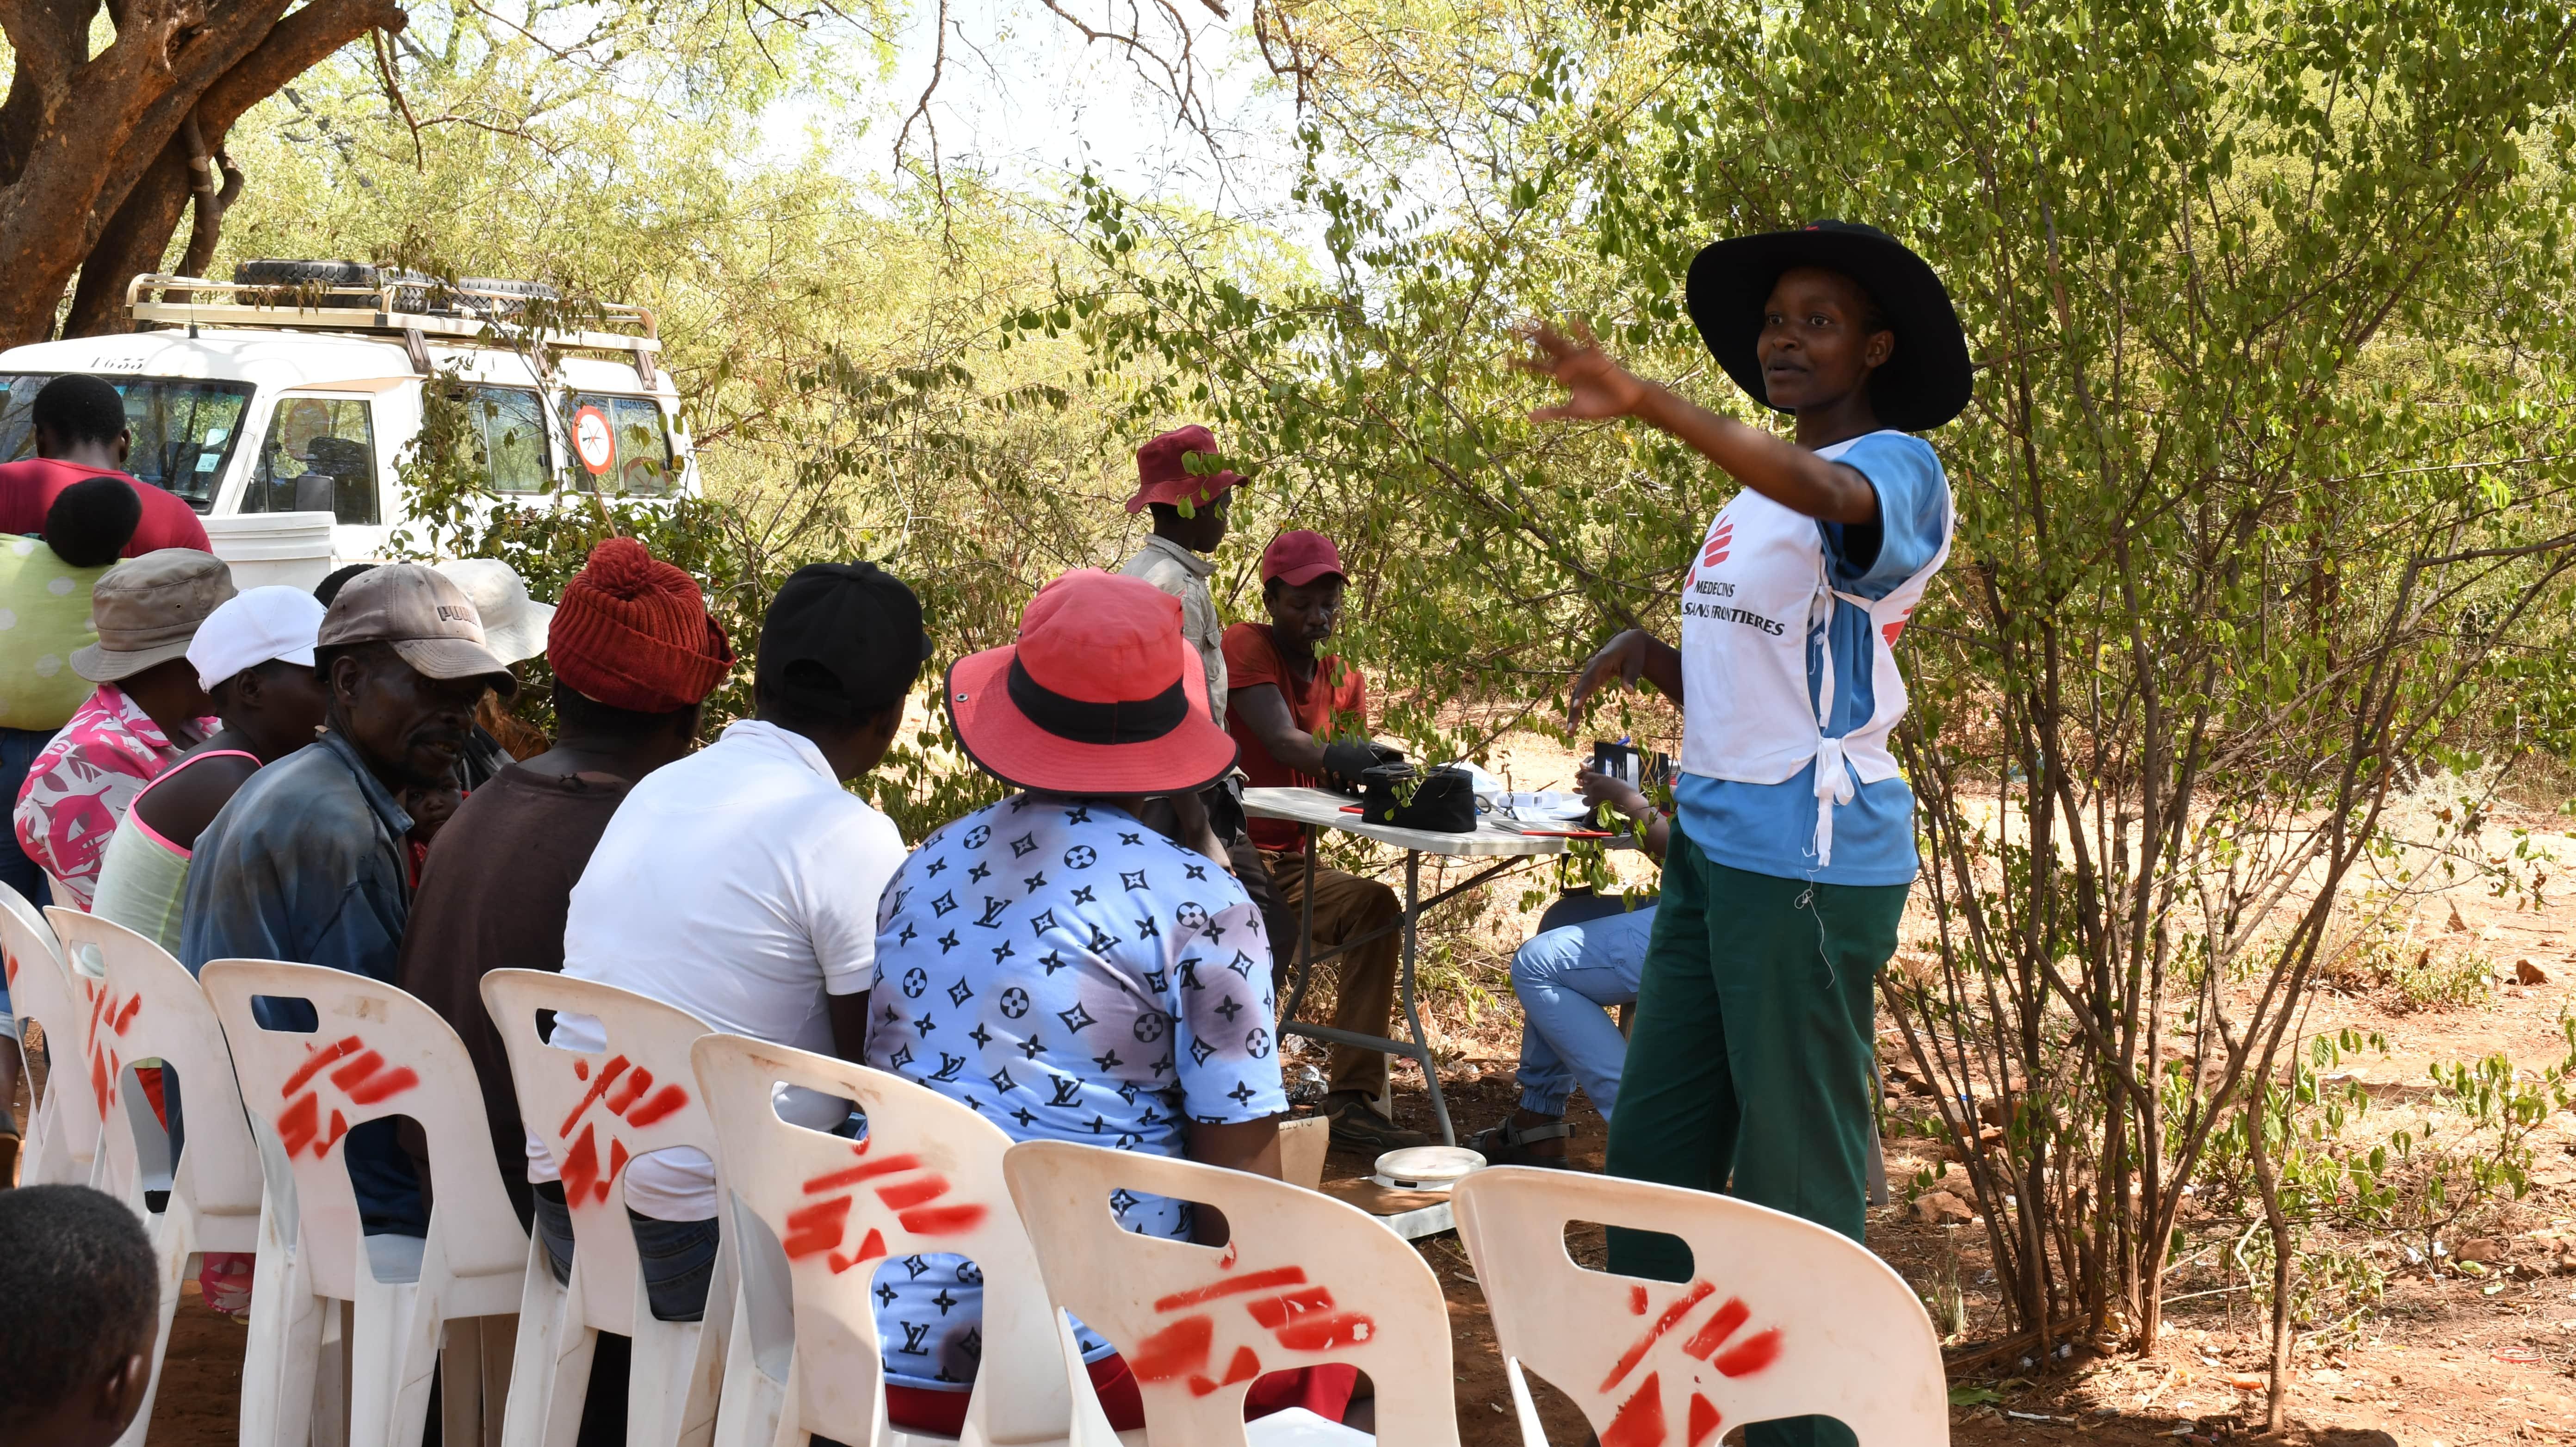 Artisanal Miners in Zimbabwe: The outreach programme aims to bridge the health services gap and bring essential healthcare services directly to the miners’ doorsteps.